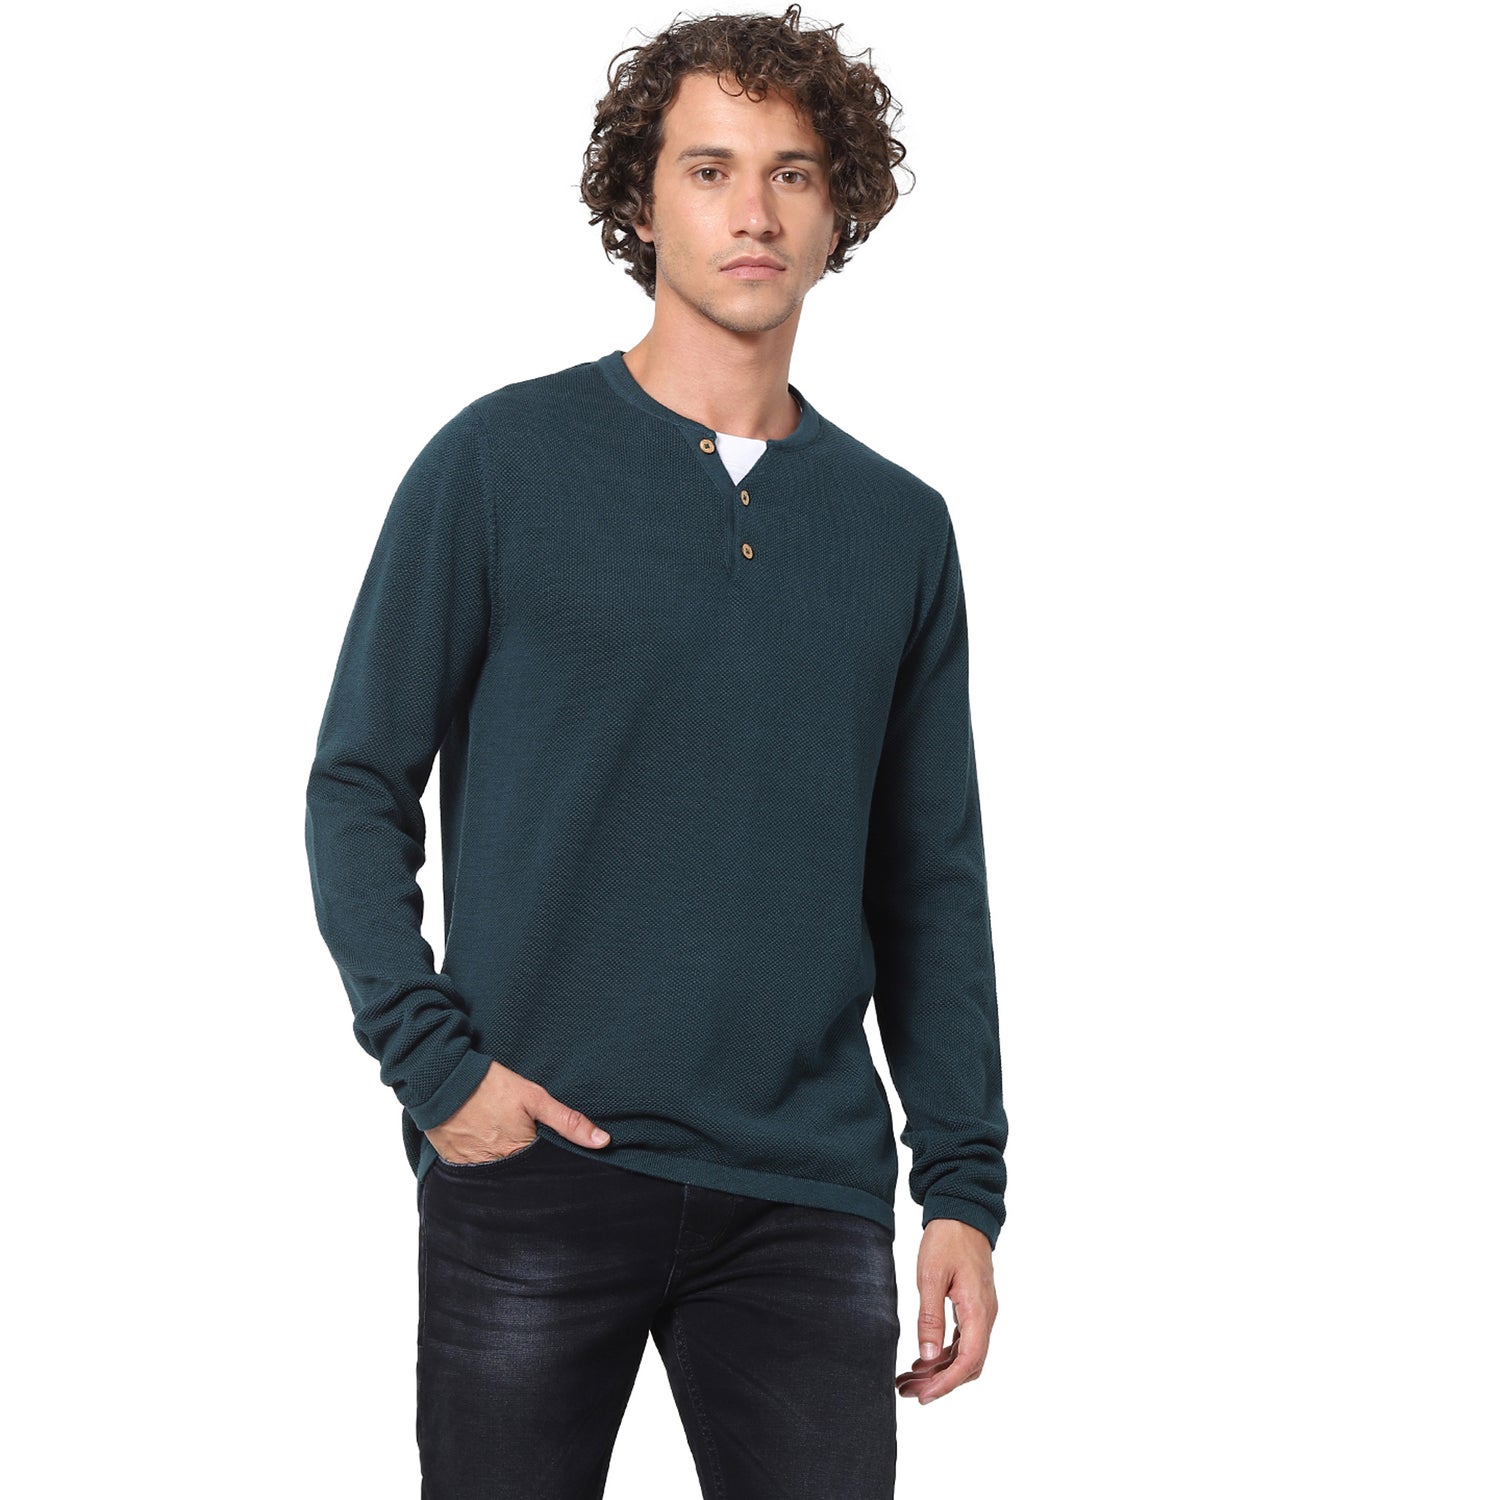 Green V-Neck Solid Sweaters (TECHILLPIC)